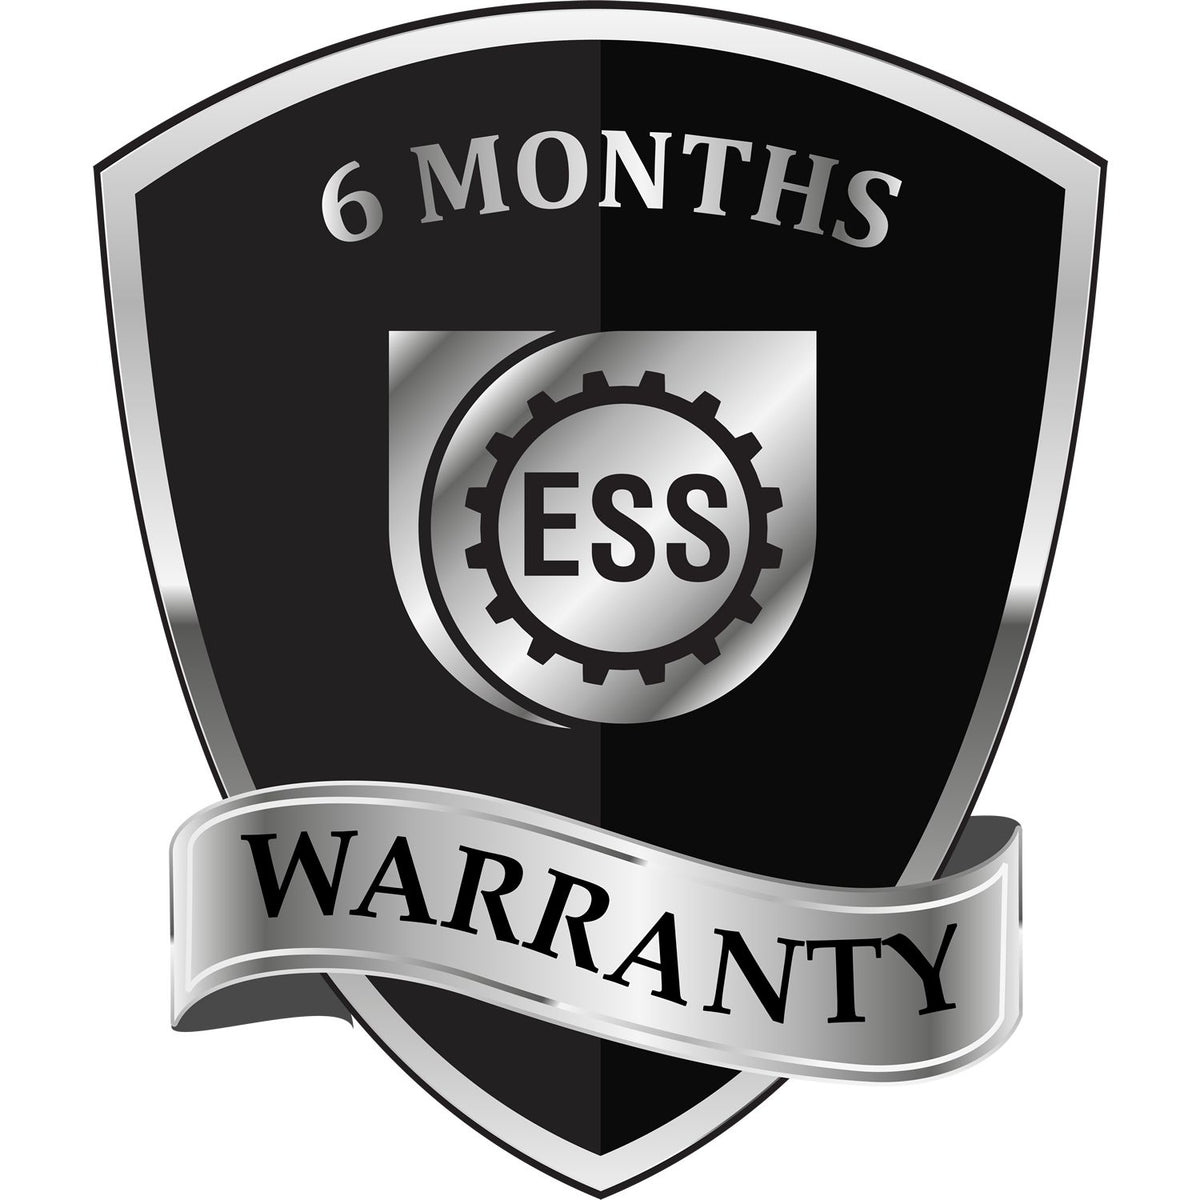 A badge or emblem showing a warranty icon for the PSI Indiana Notary Stamp